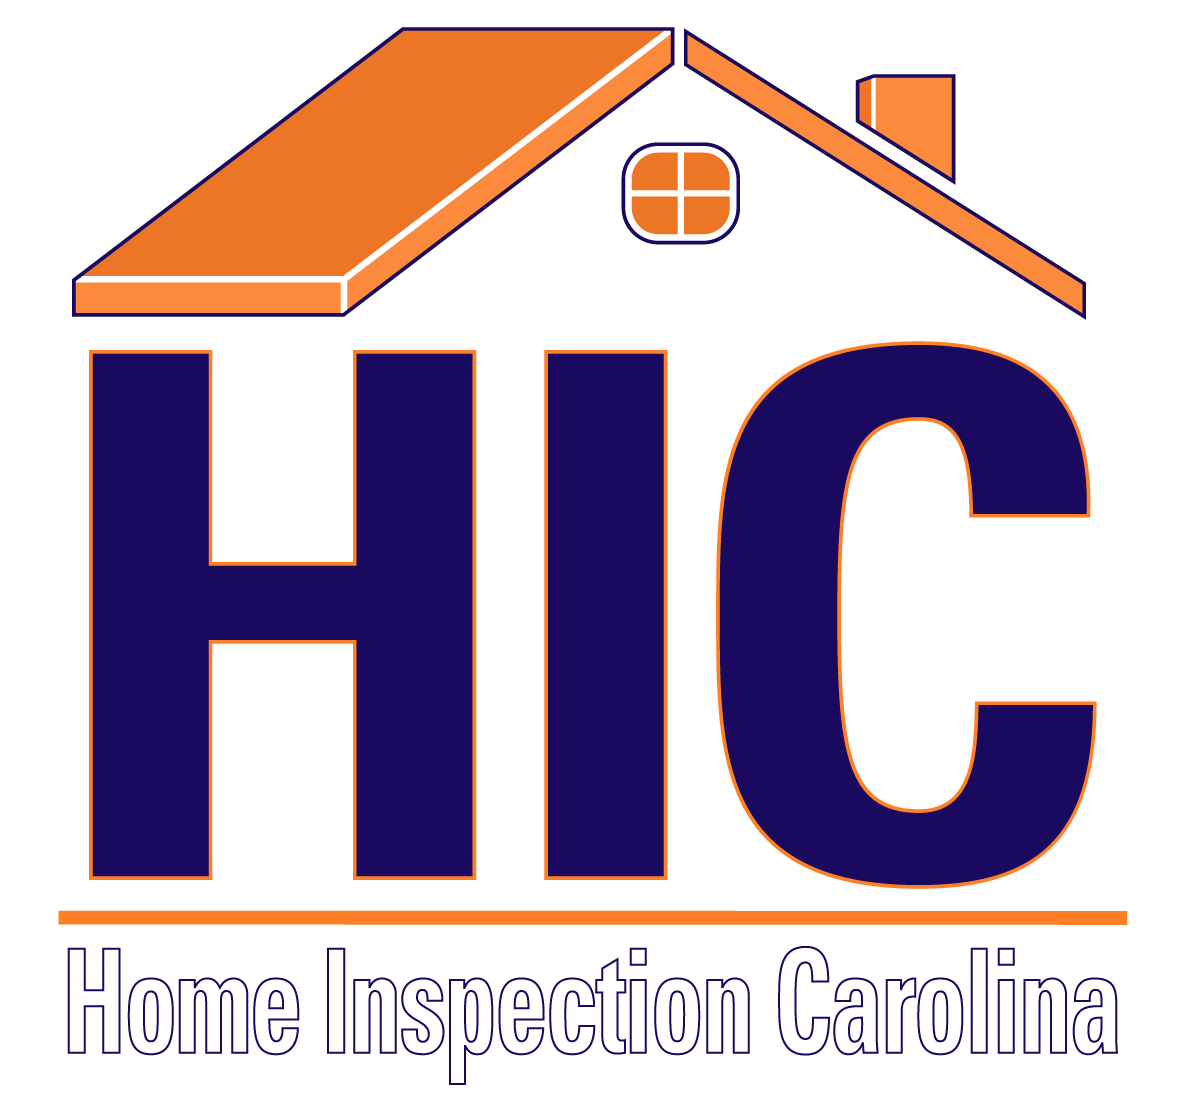 13 Home Inspection Tips for Sellers